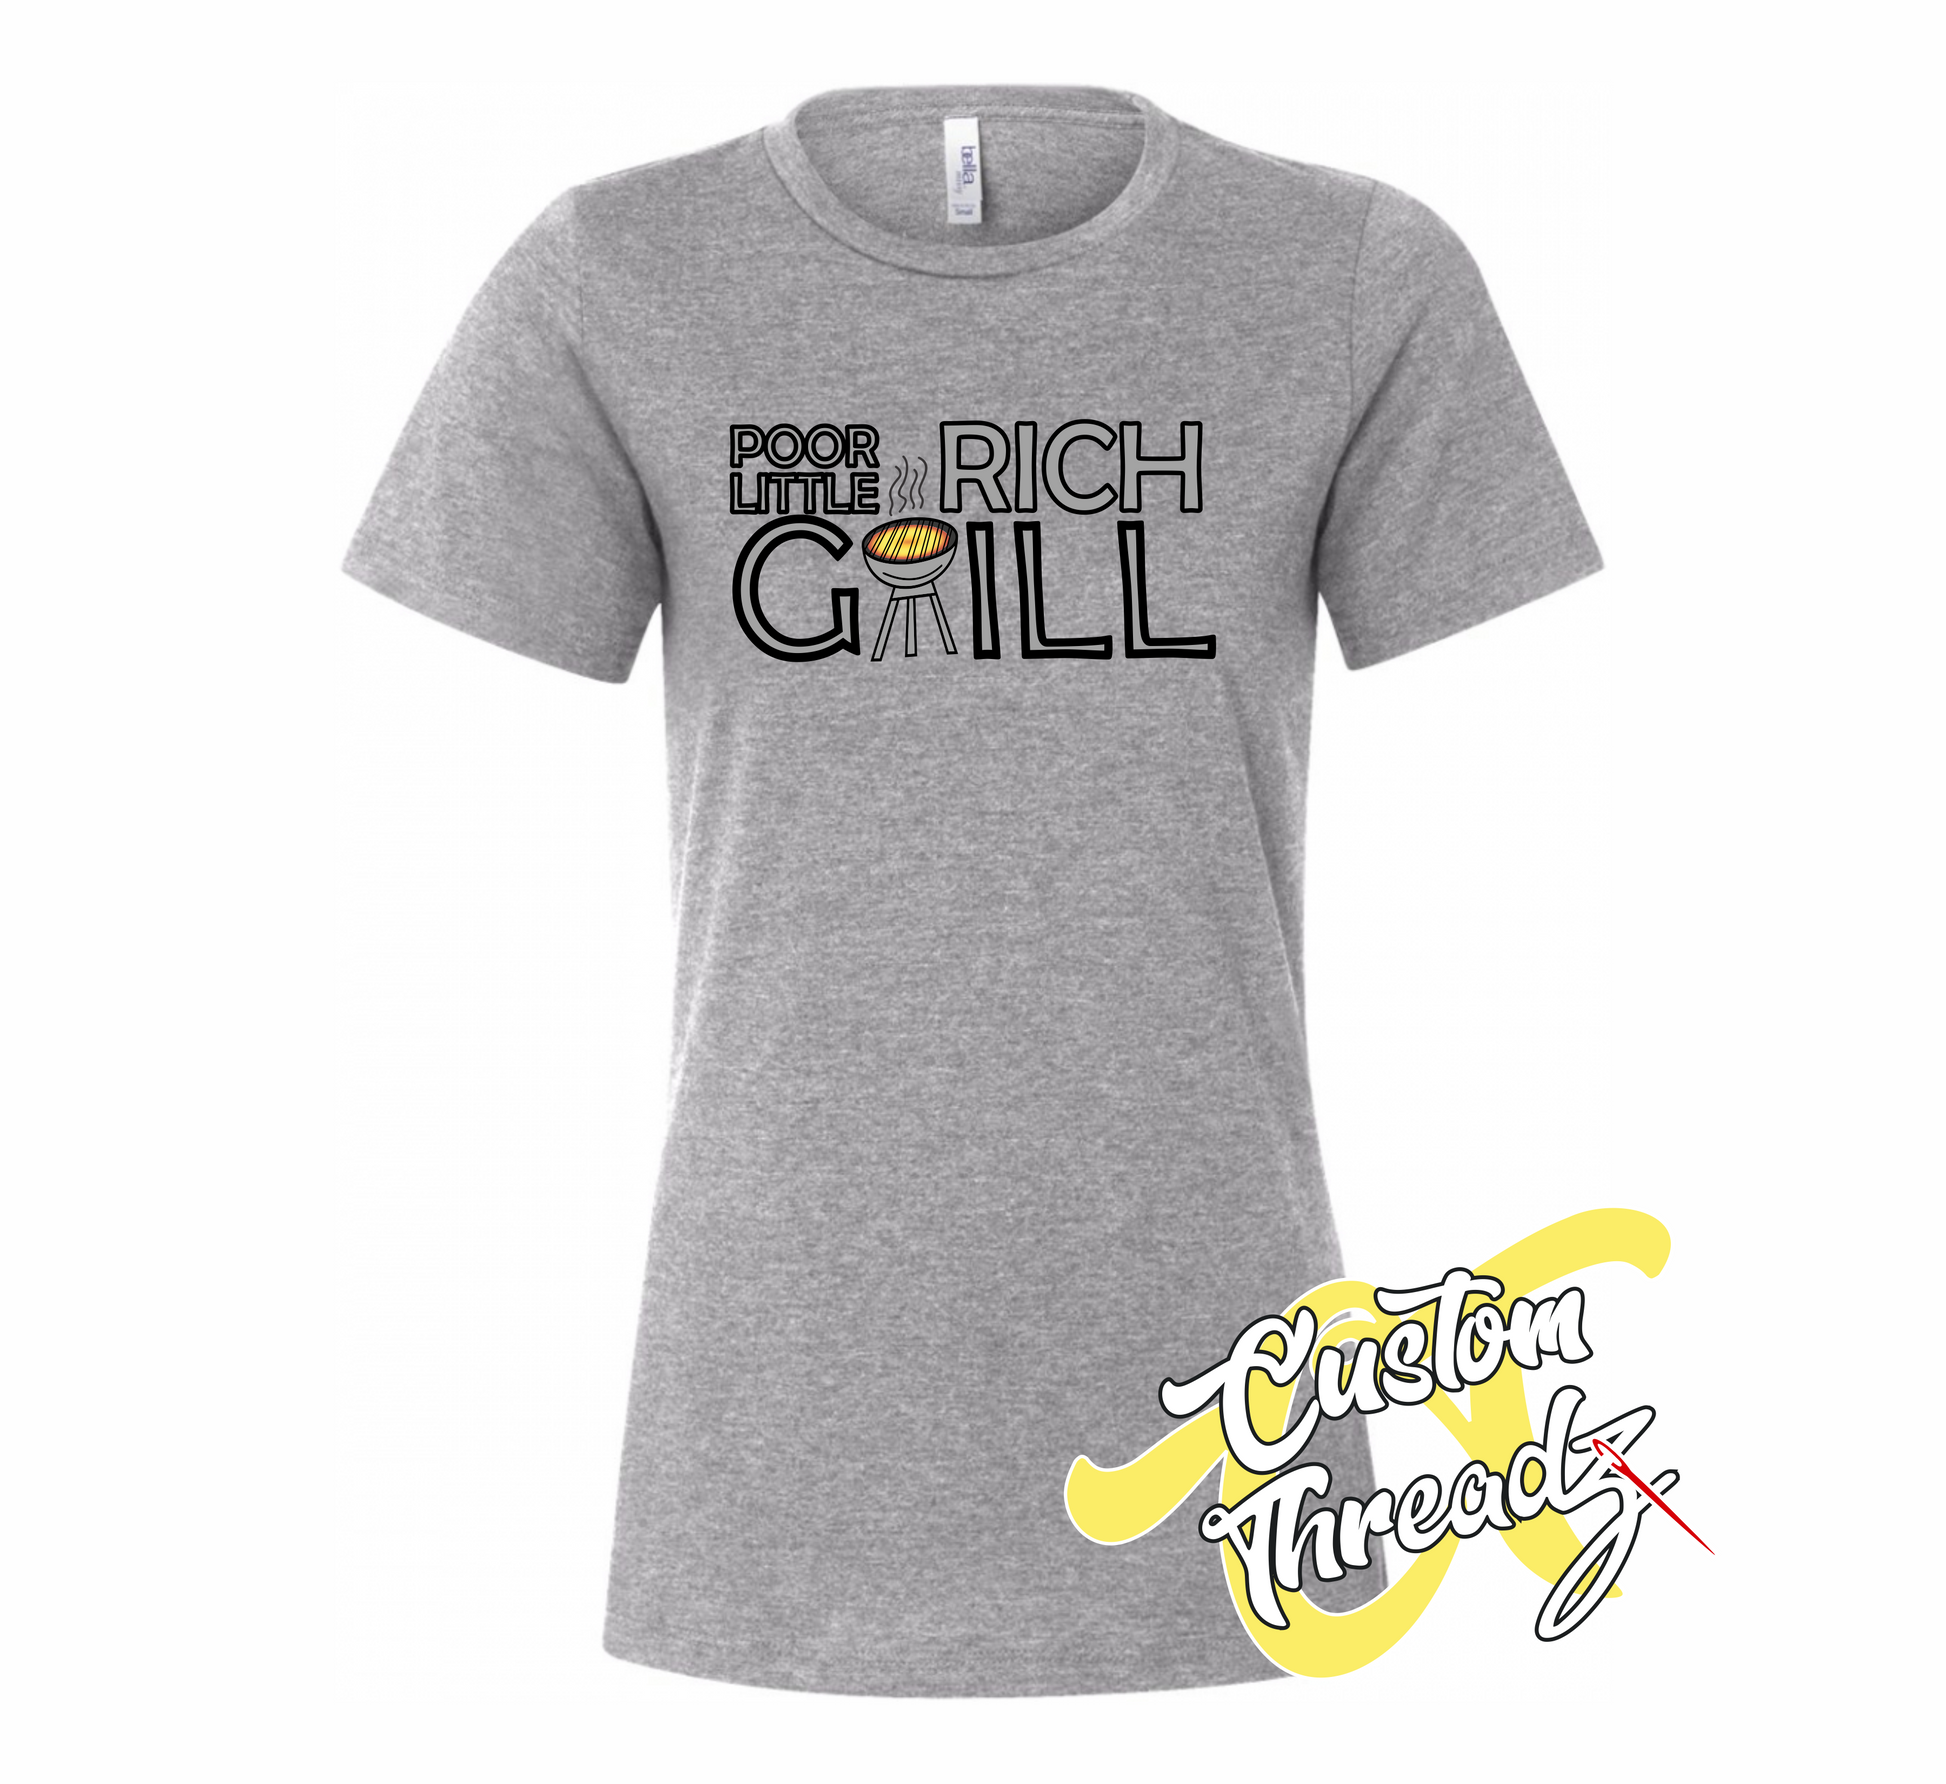 athletic heather grey womens tee with poor little rich grill schitts creek DTG printed design